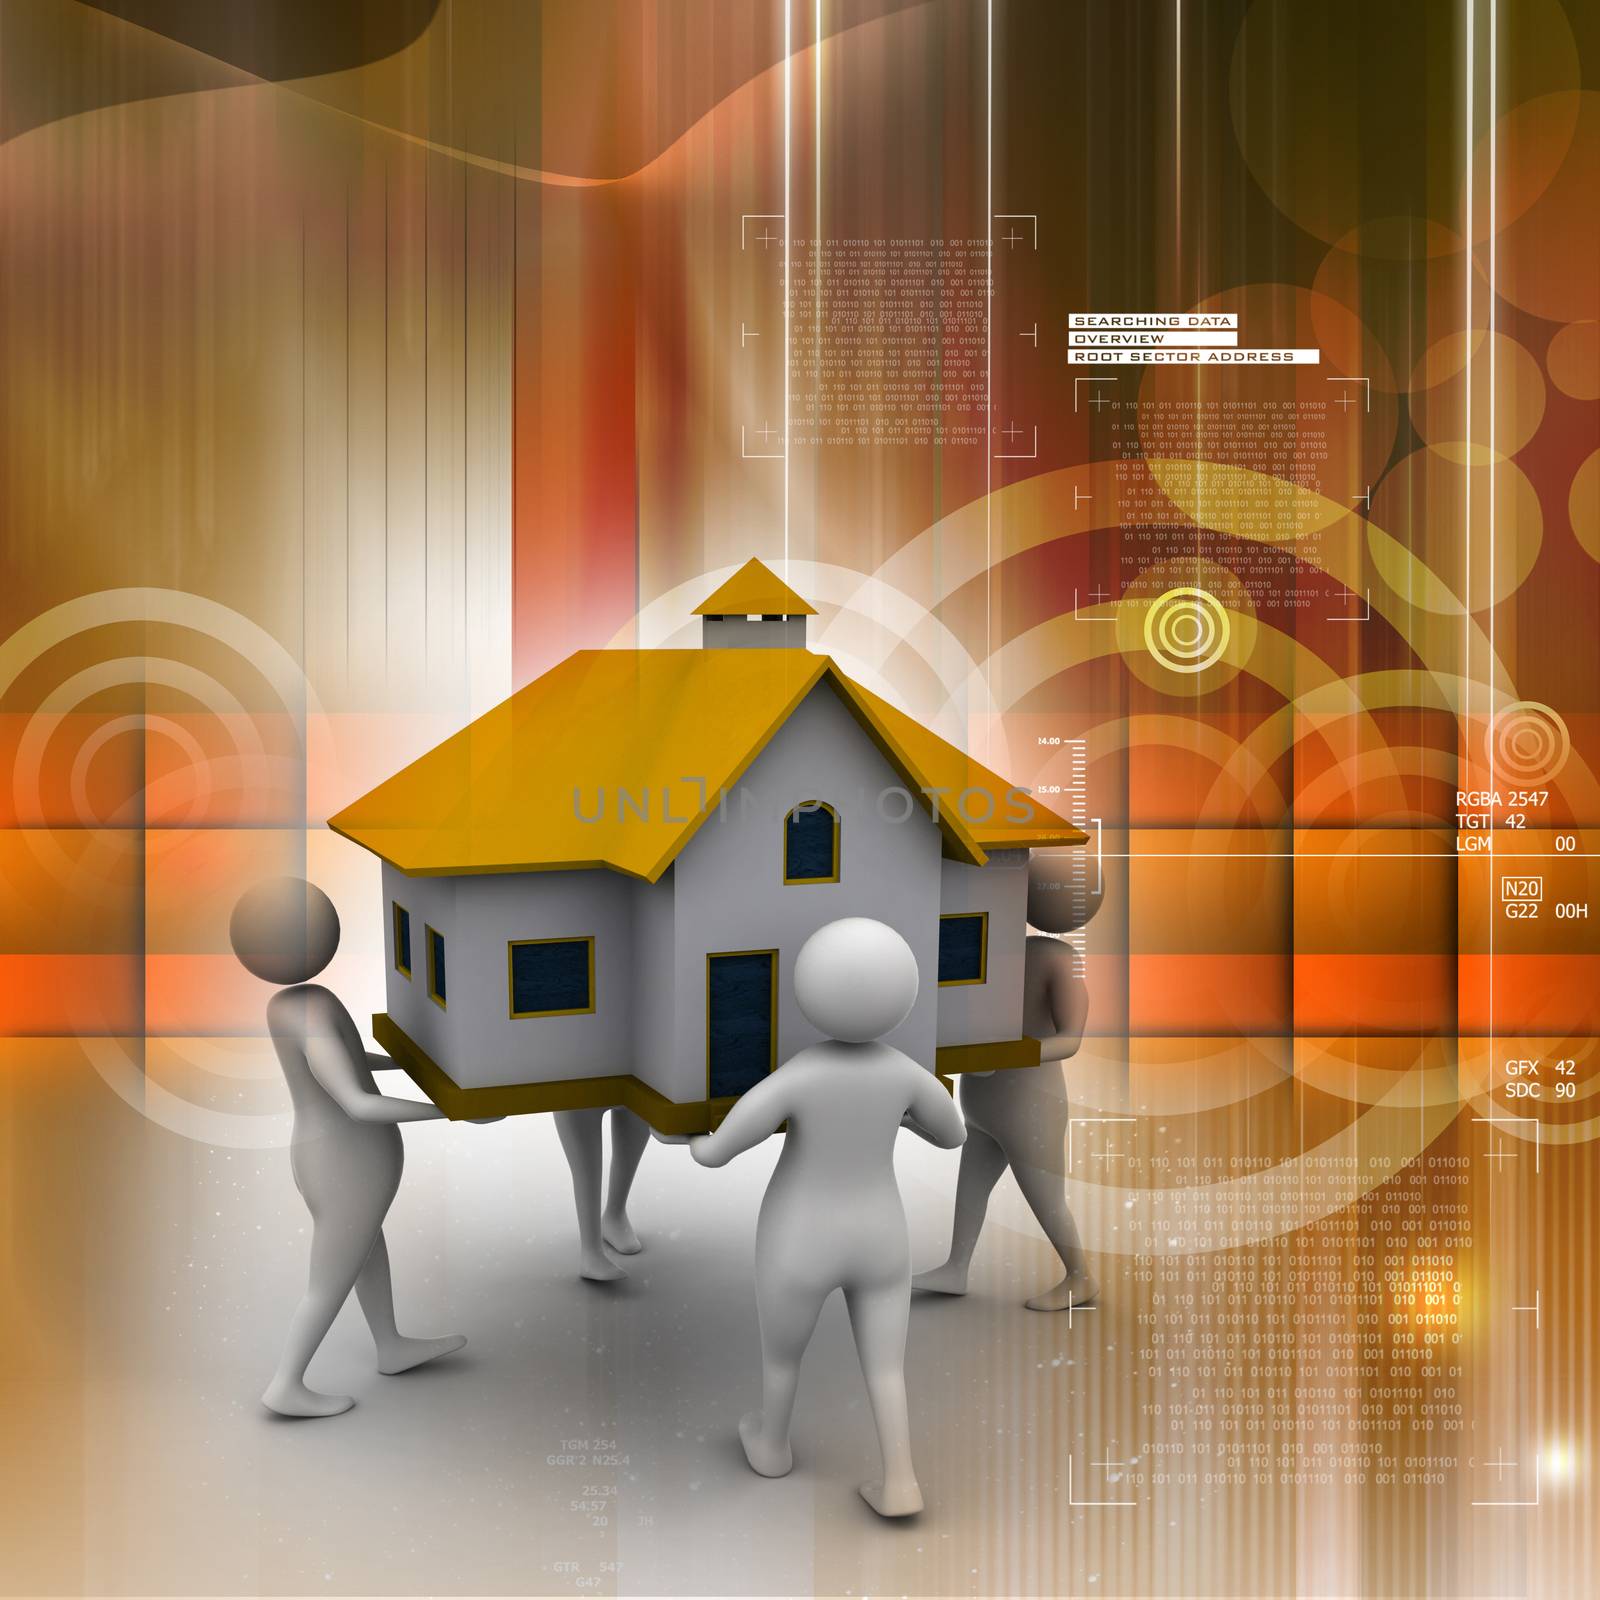 3D people holding a house